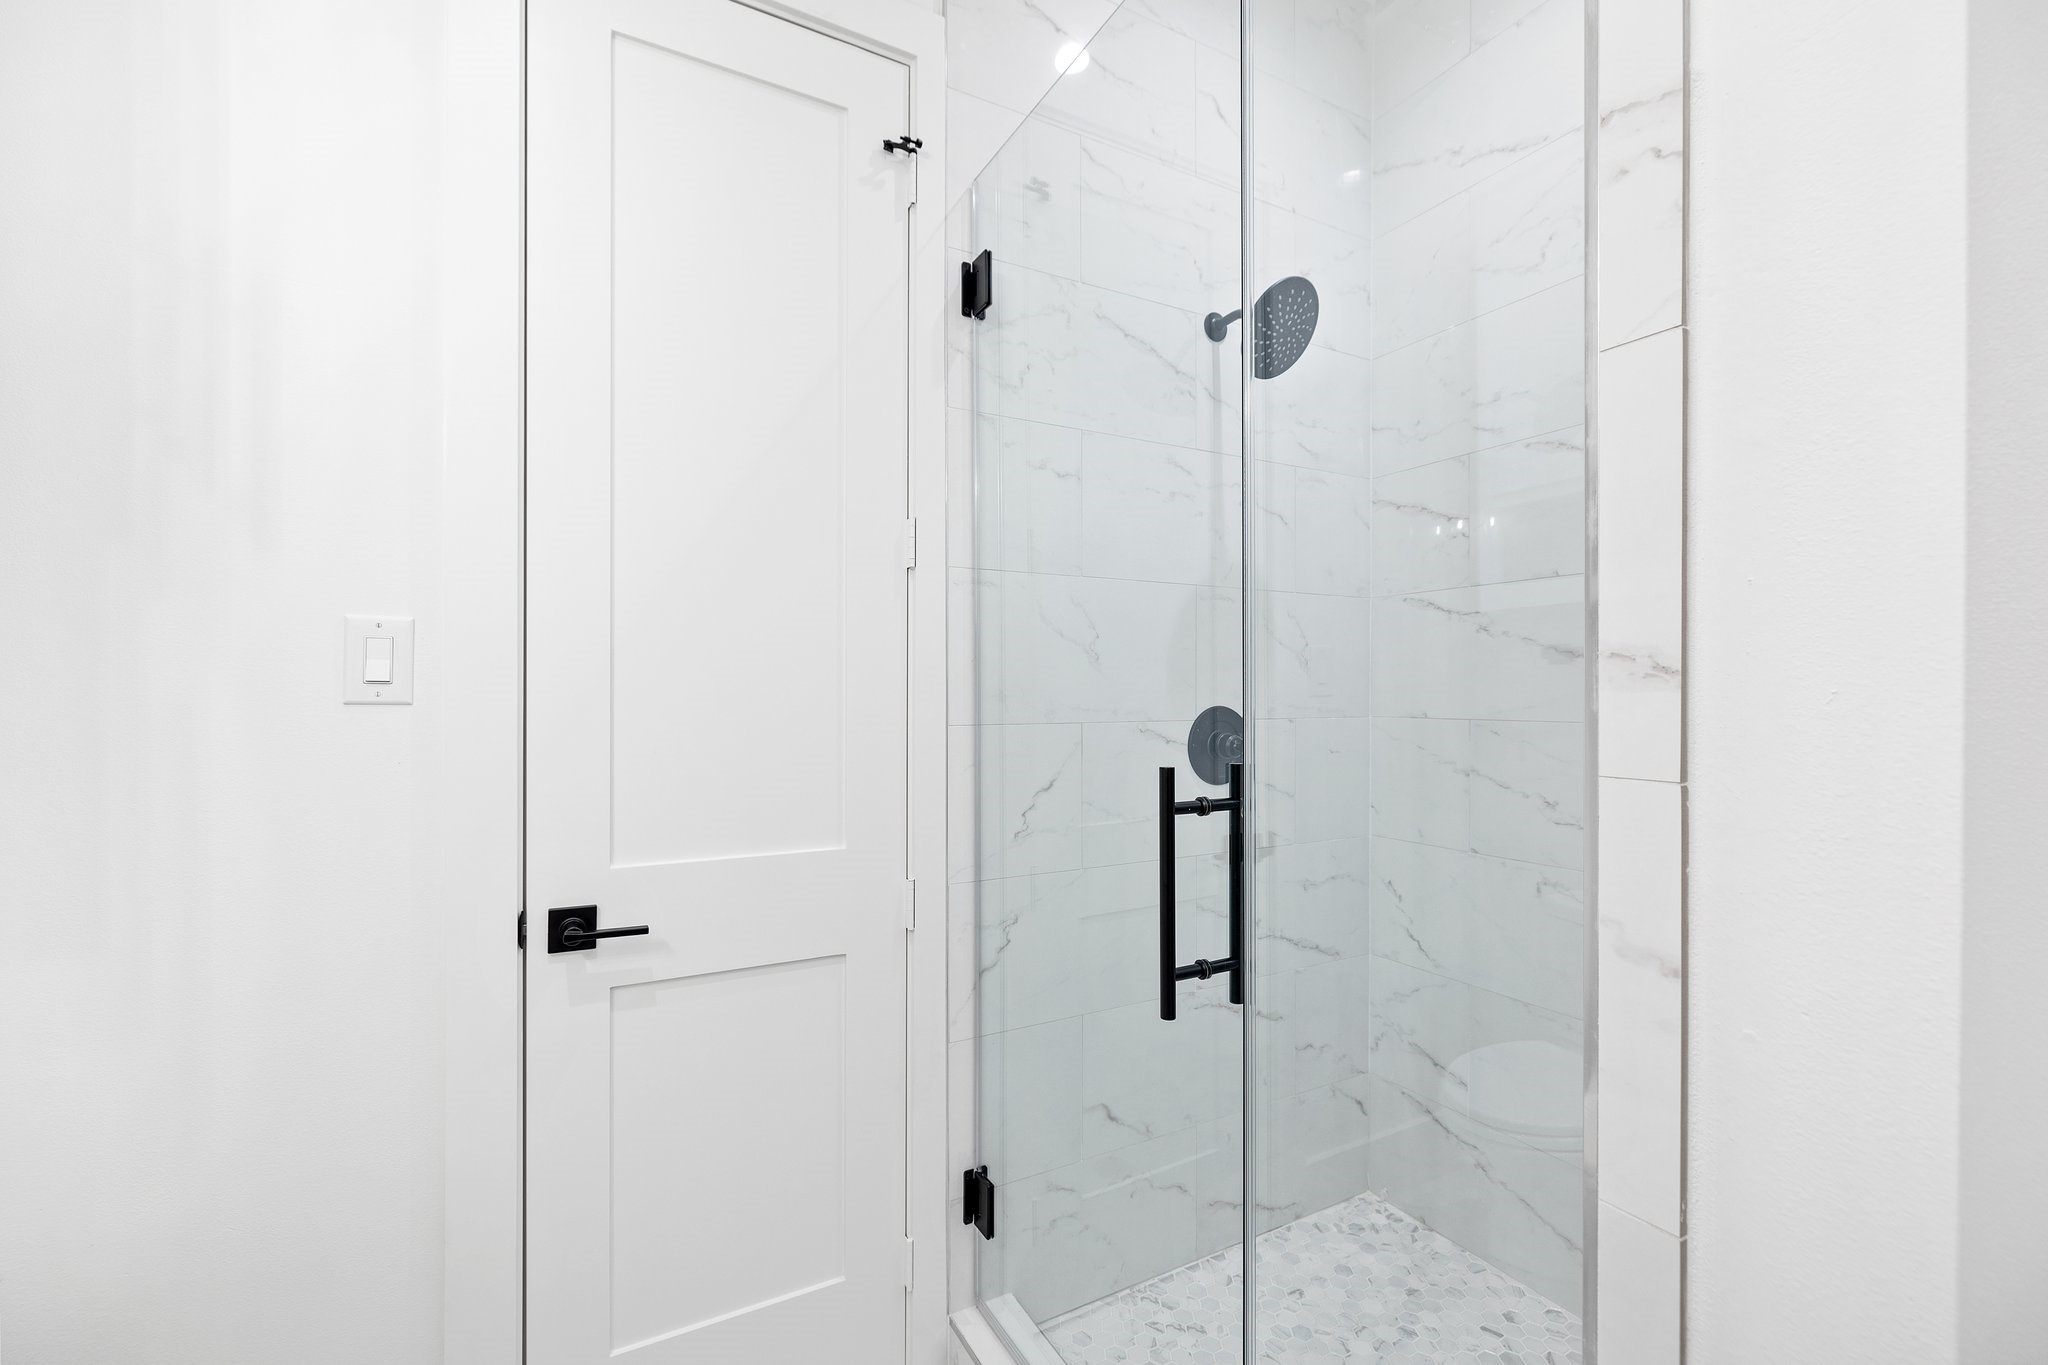 This bathroom offers a frameless glass shower, offering versatility for different preferences.